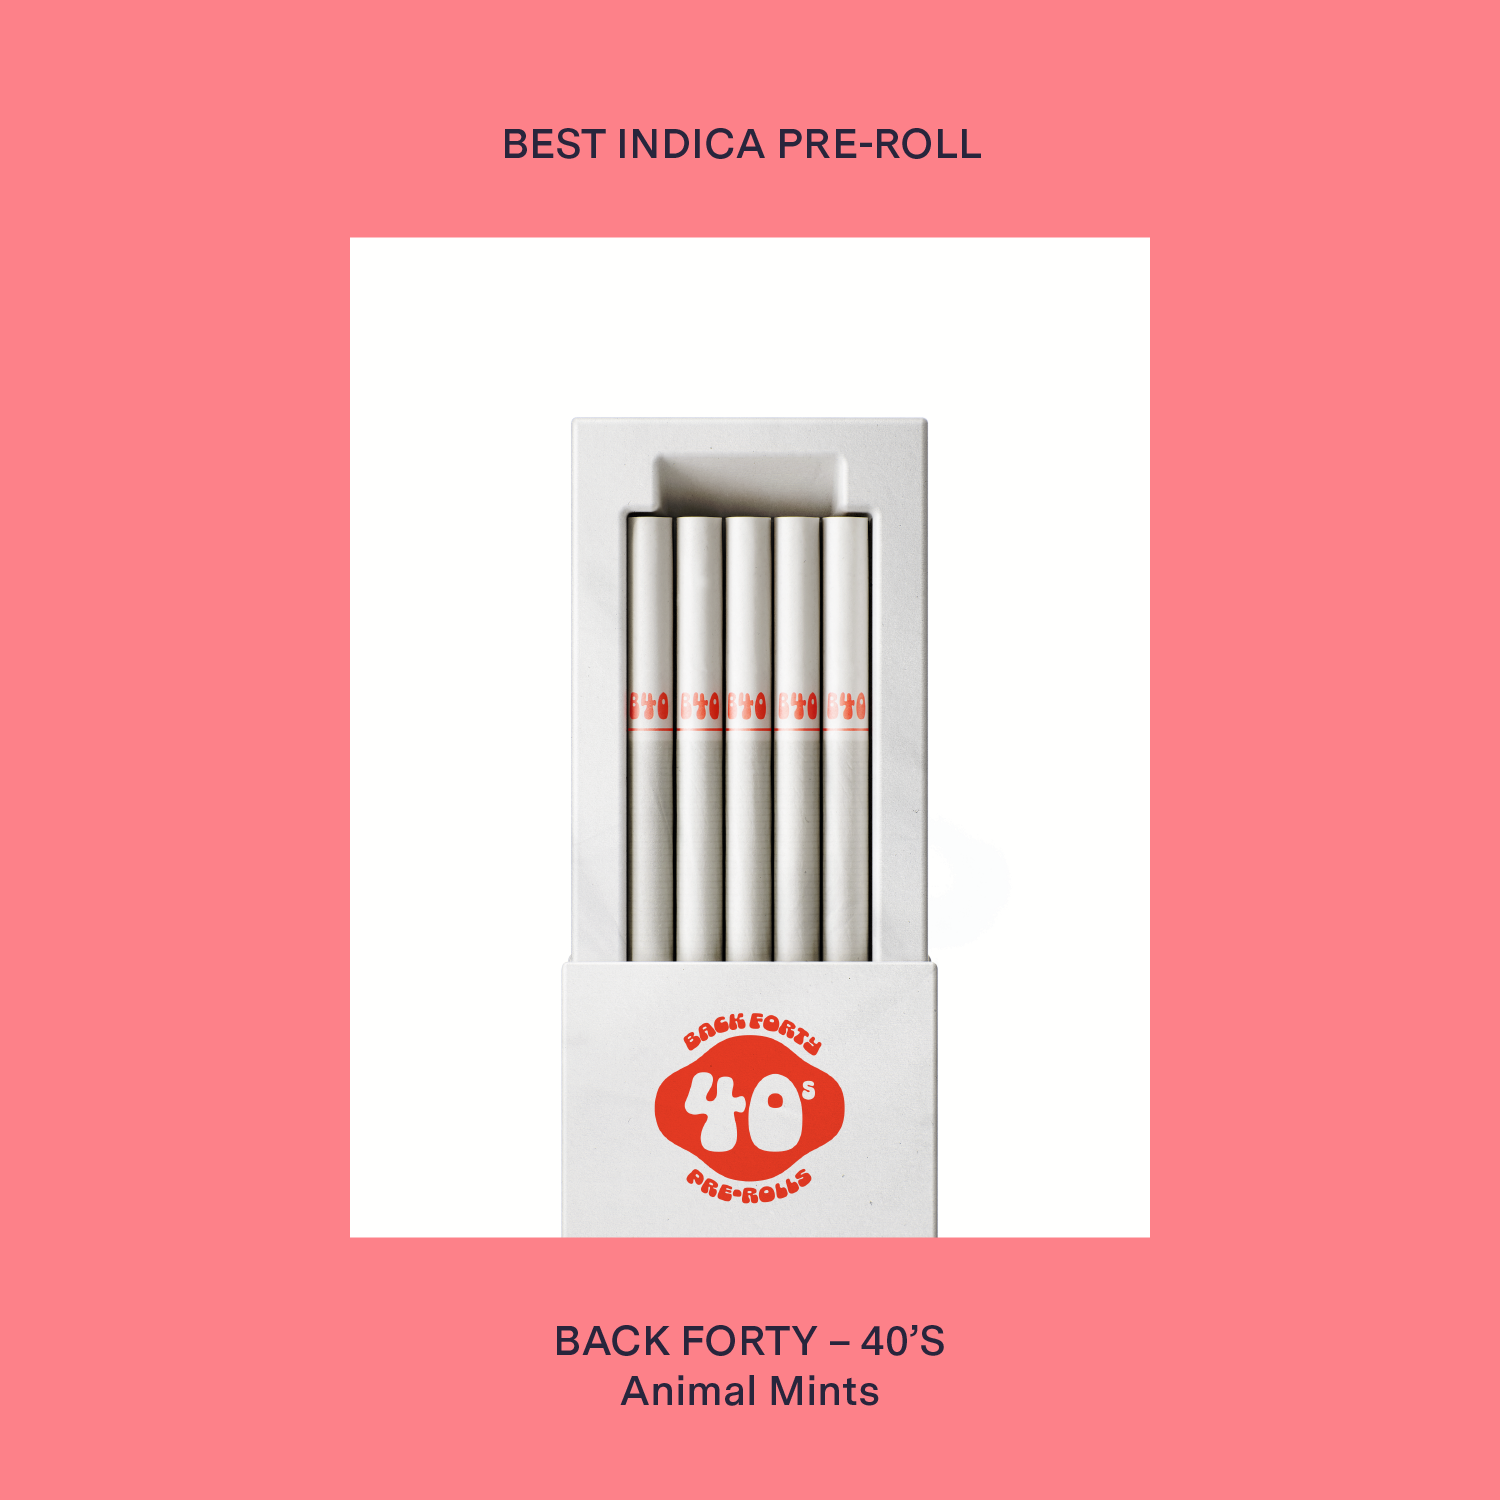 Back Forty Indica Pre-Rolls